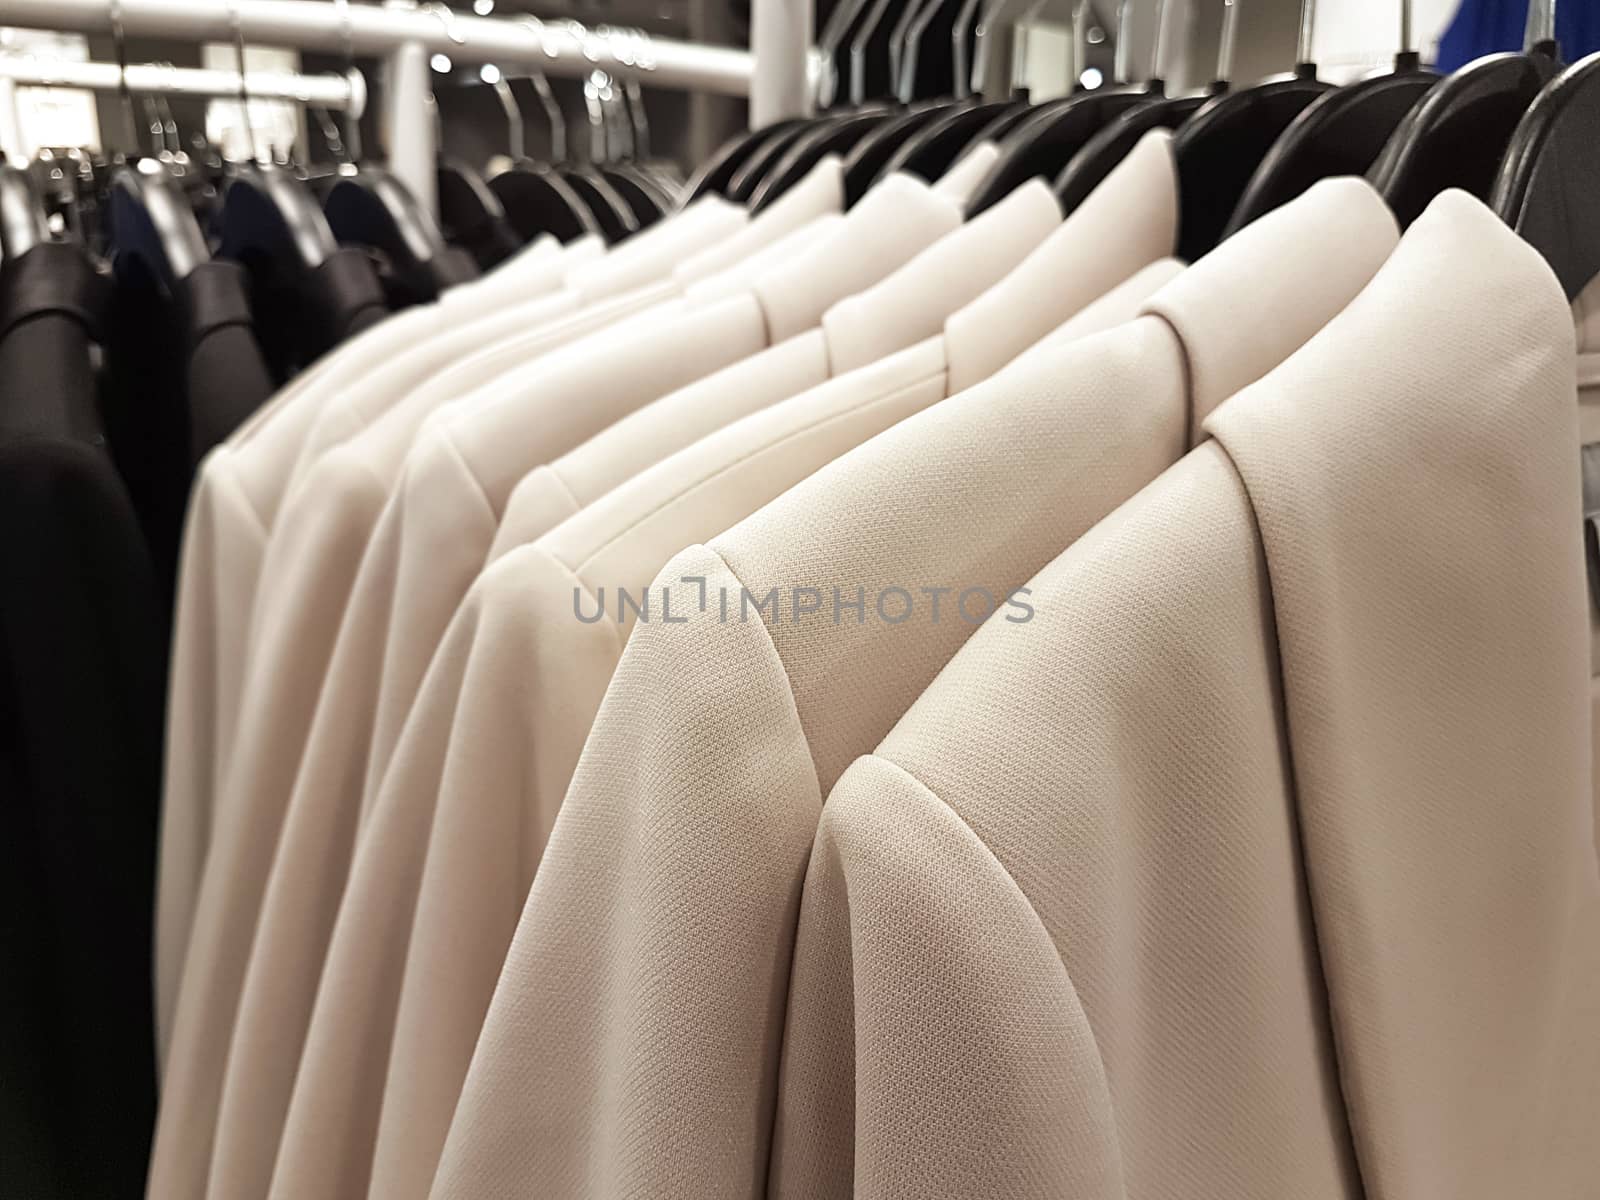 shopping concept image - collection of fashionable clothes hanging in a row in the store ( selective focus)